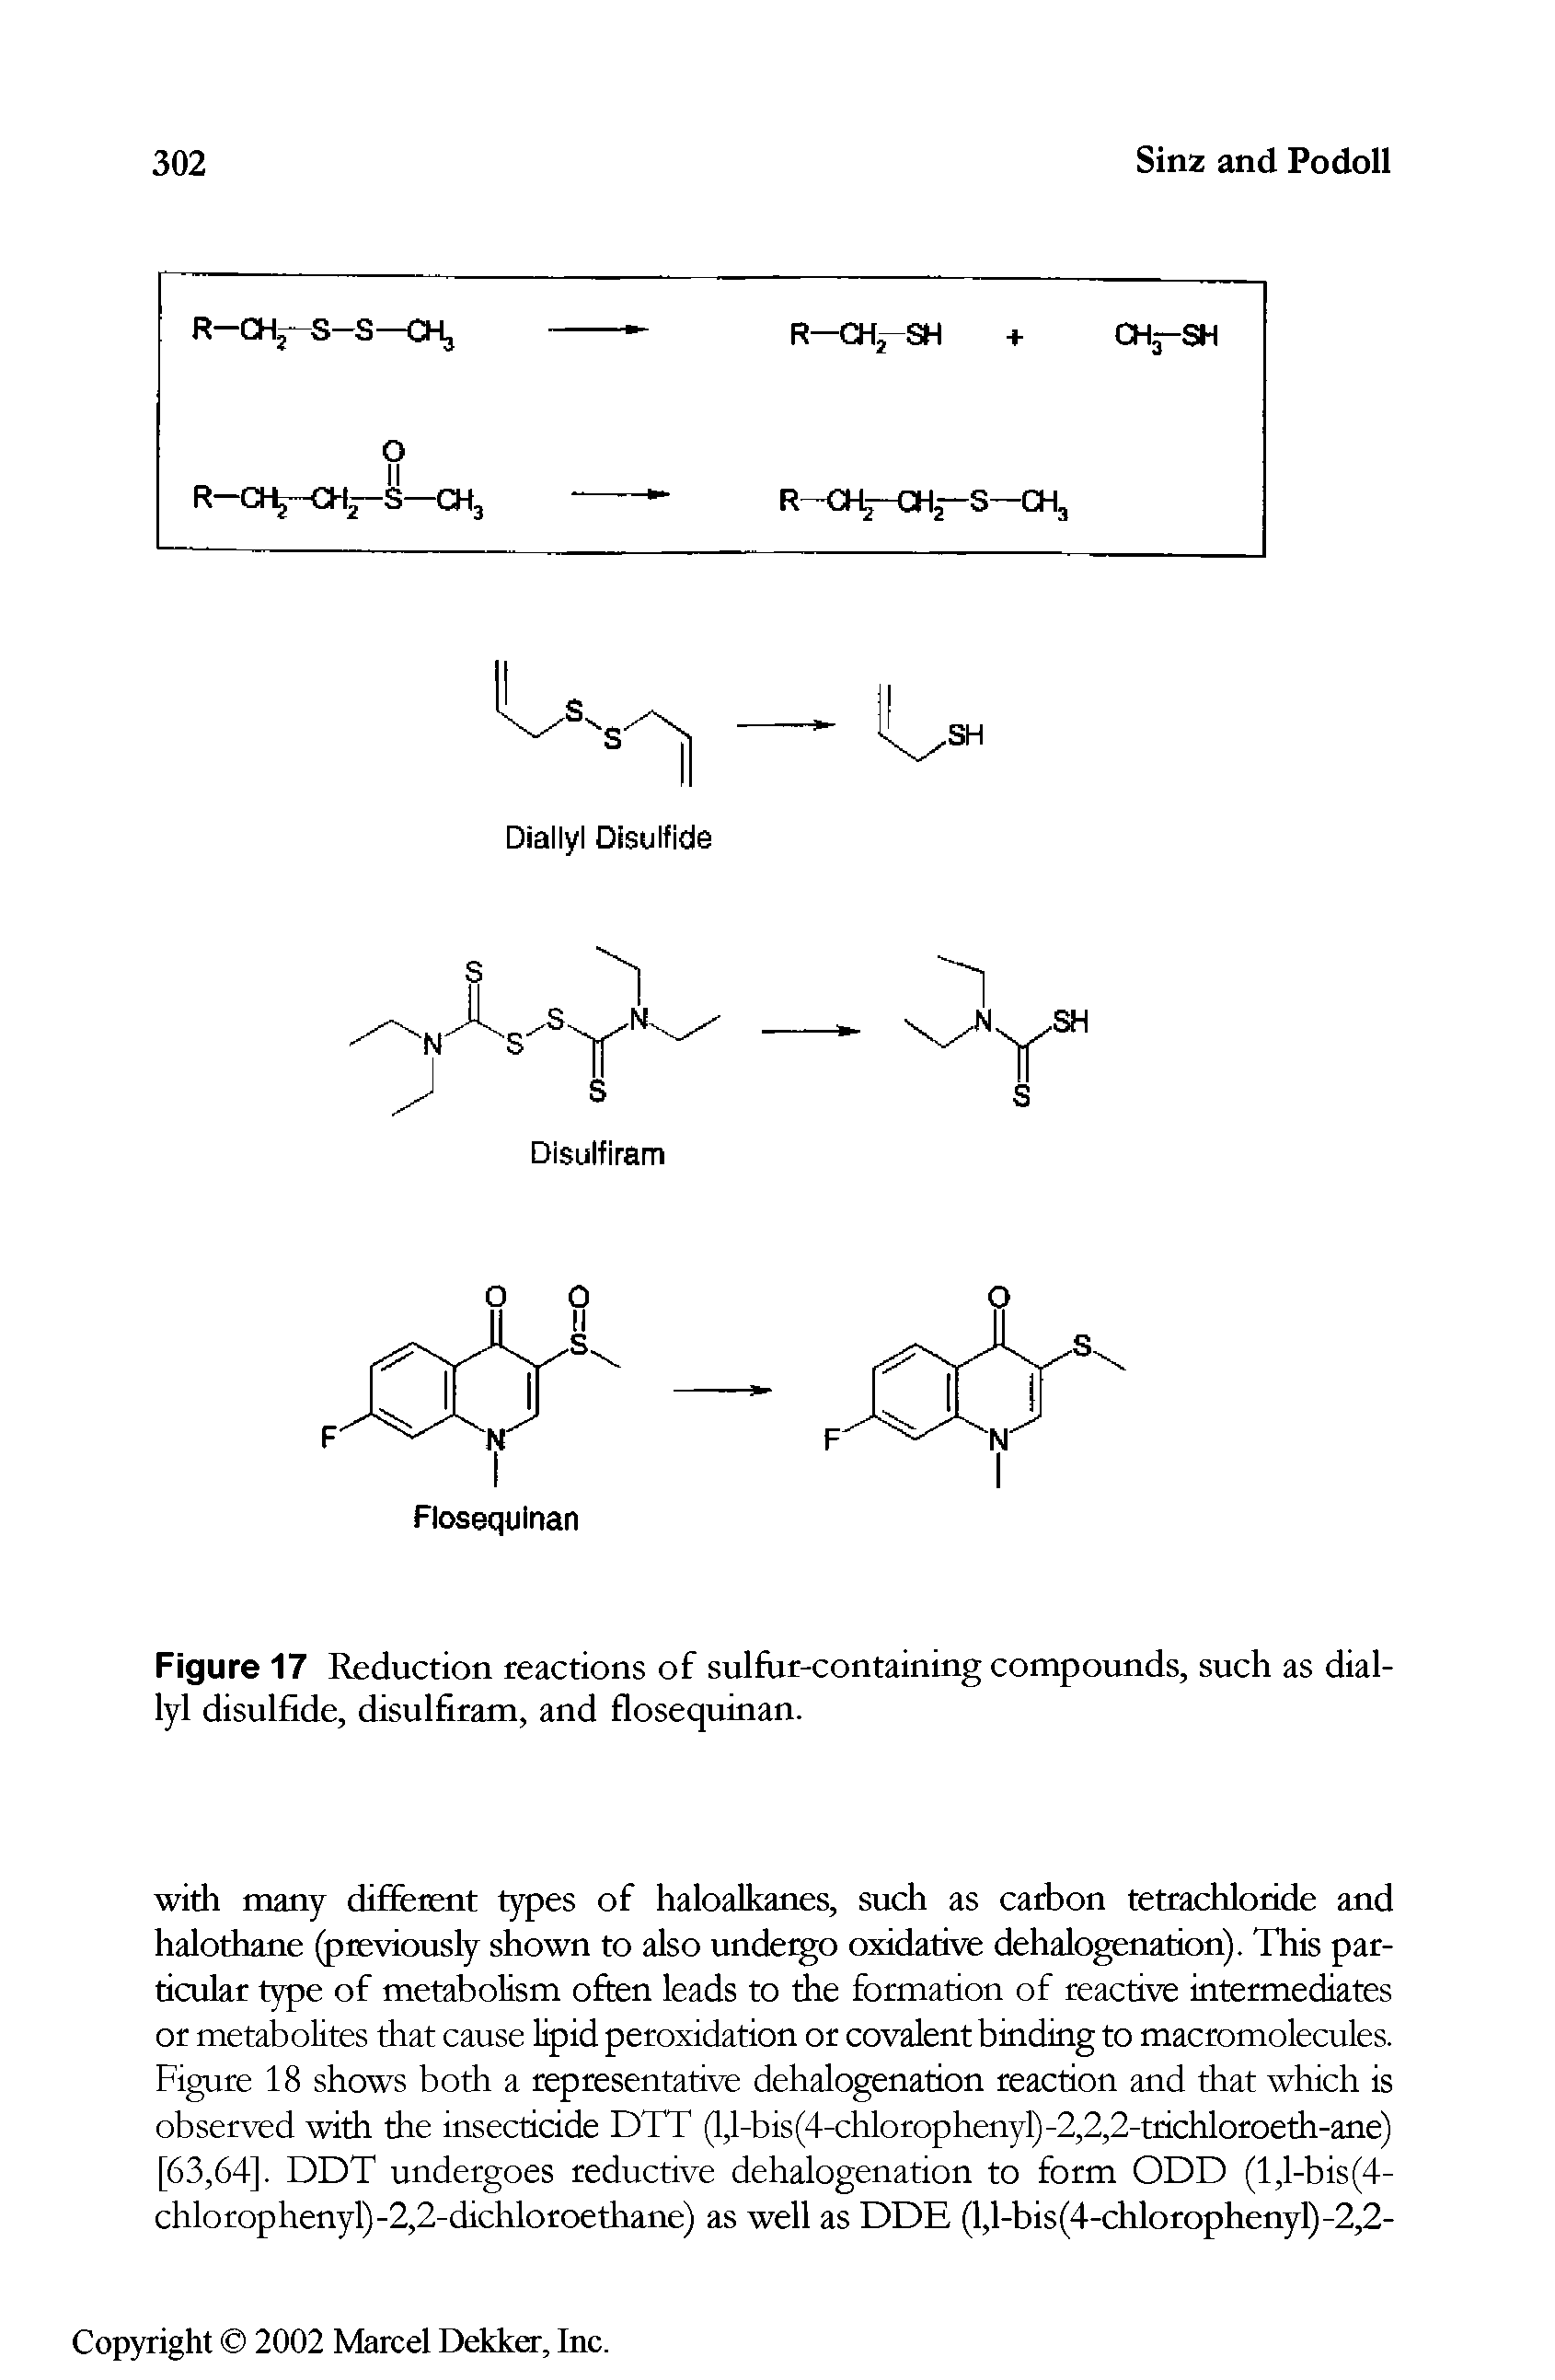 Figure 17 Reduction reactions of sulfur-containing compounds, such as diallyl disulfide, disulfiram, and flosequinan.